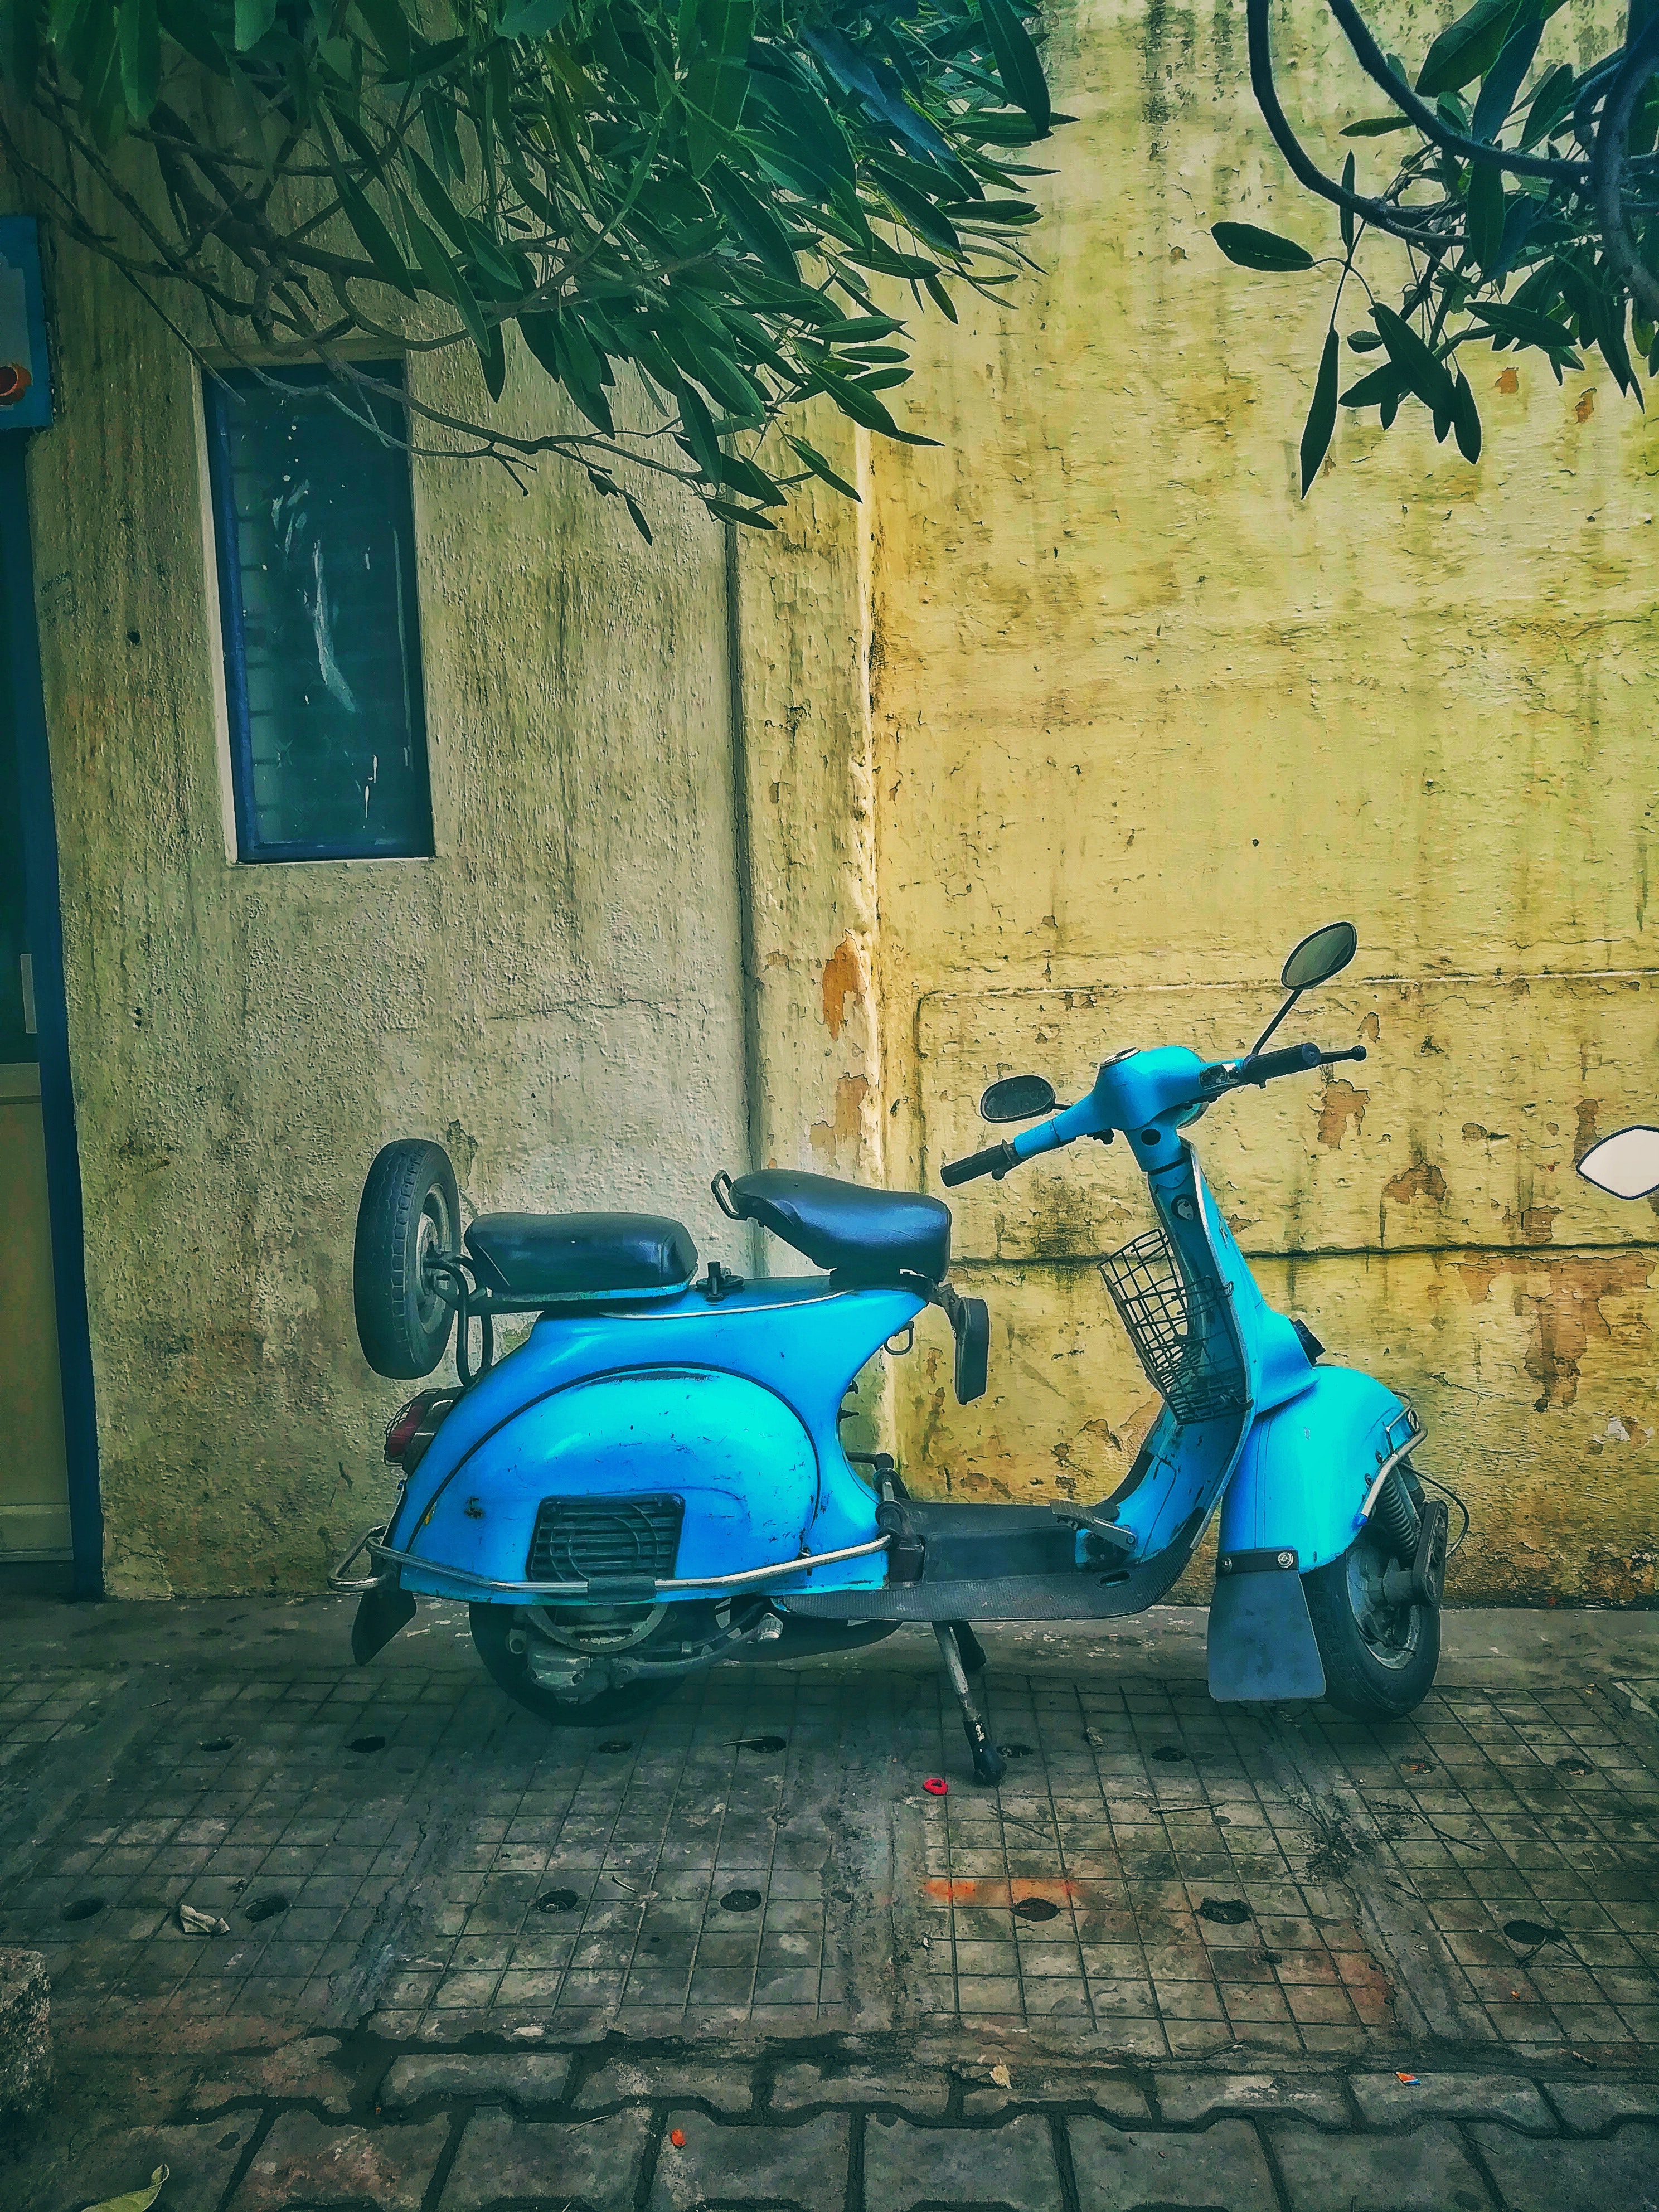 Teal motor scooter on road photo